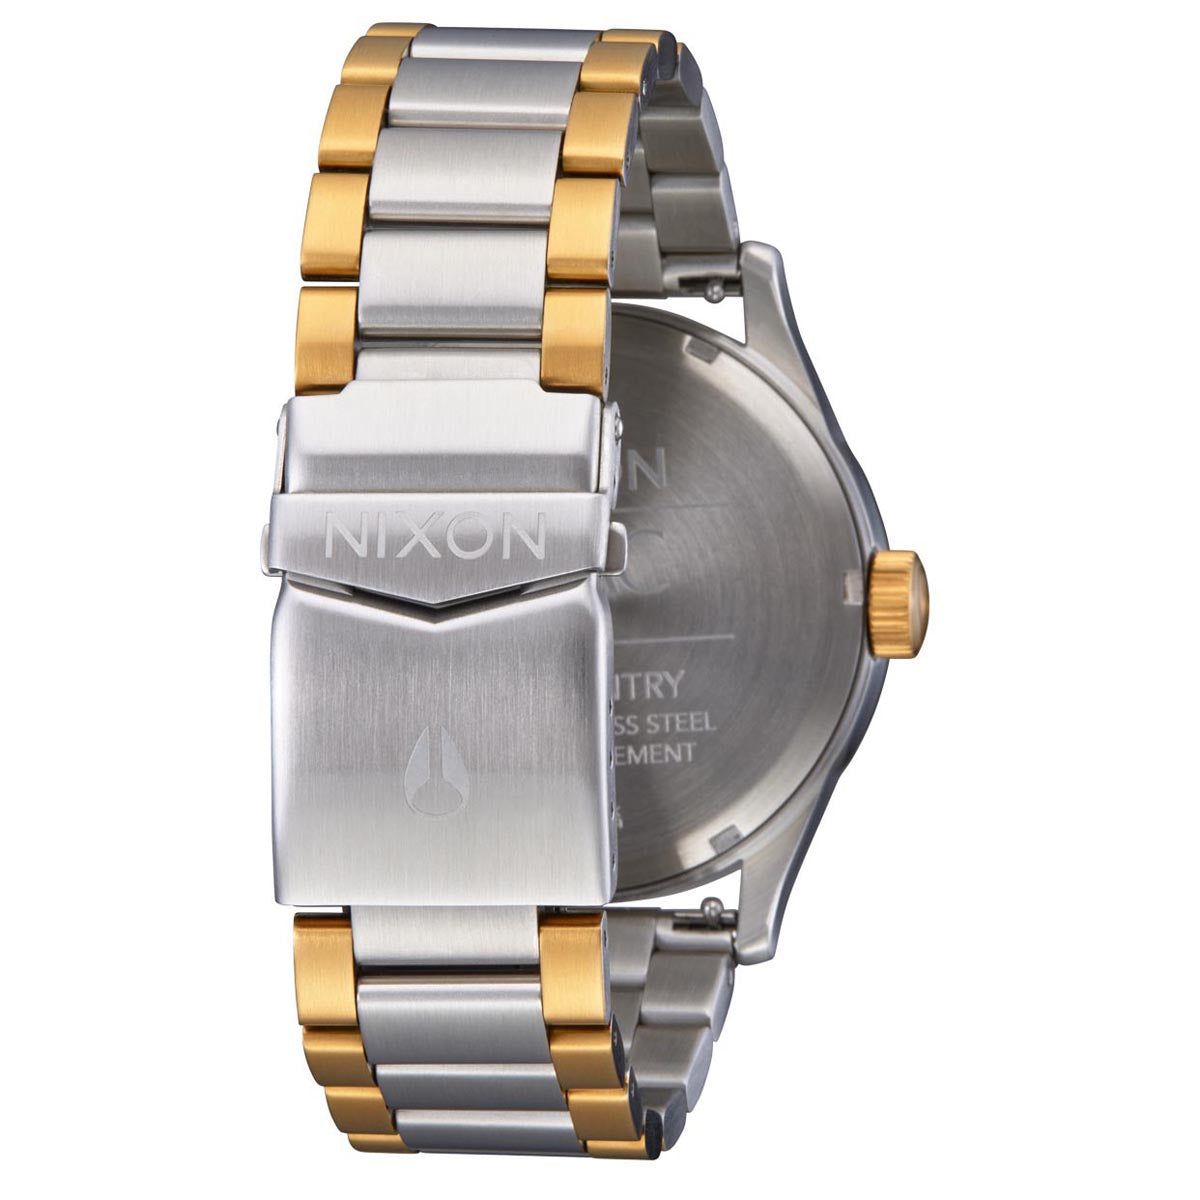 Nixon Tupac Sentry Stainless Steel Watch - Gold/Silver/Black image 3